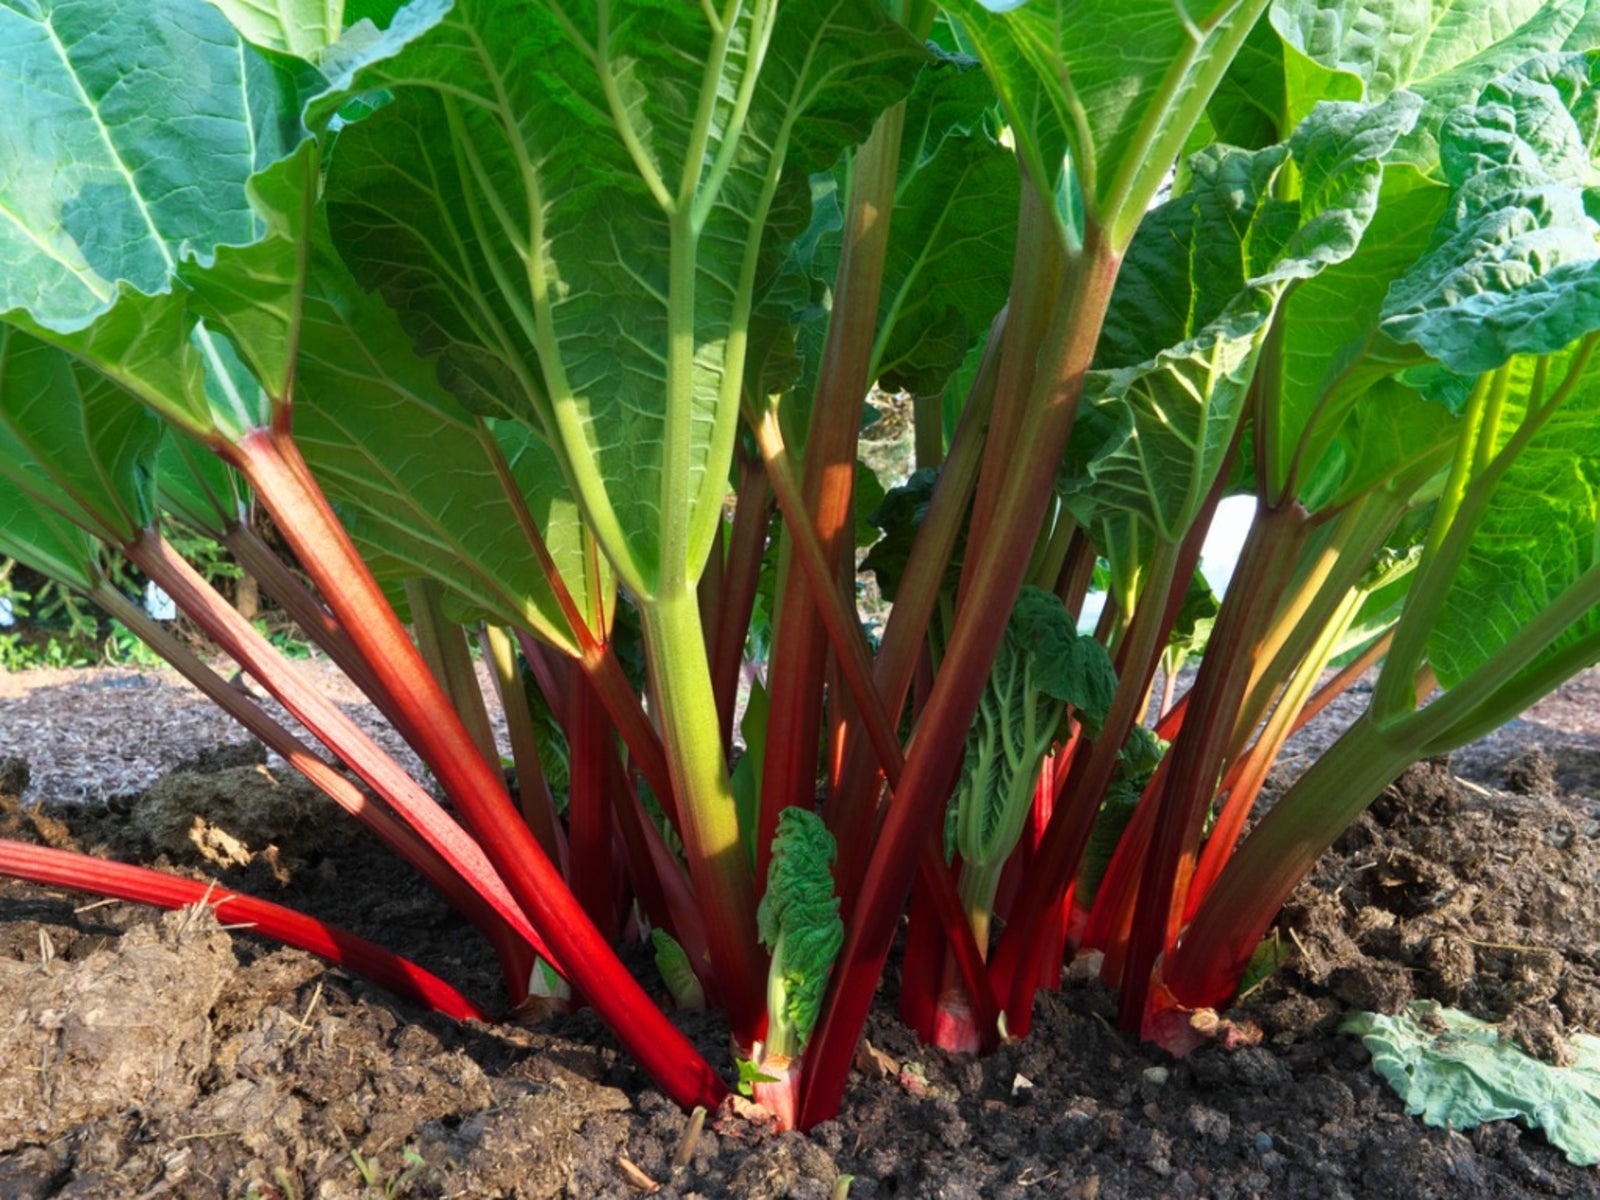 Crimson Cherry Rhubarb Care – Learn About Planting Crimson Cherry Rhubarb